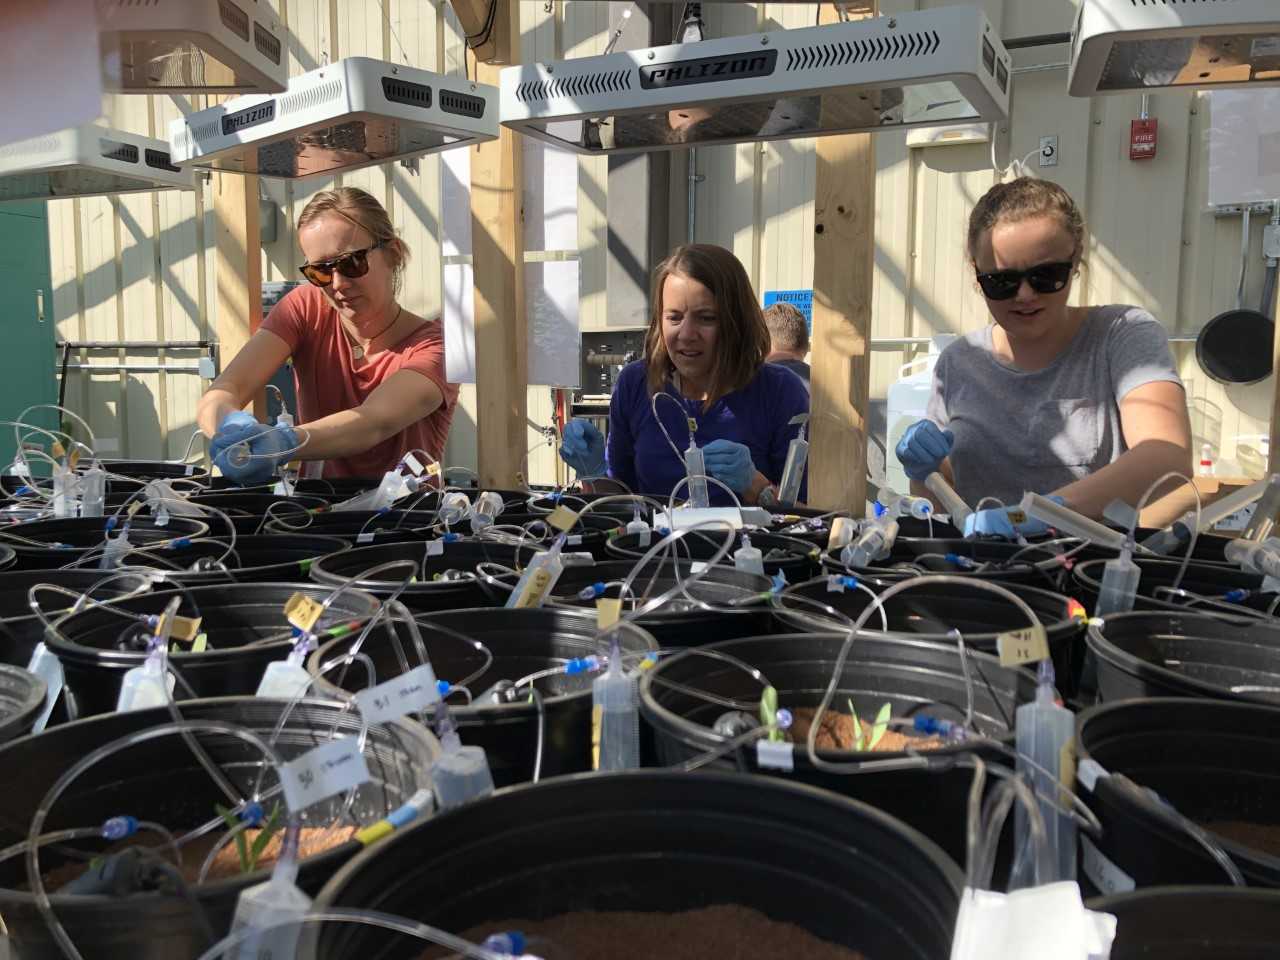 EES Atmosphere, Climate, and Ecosystem Science Research team members (left to right) Dea Musa, Turin Dickman, and Emma Lathrop collect the first soil chemistry samples in the remodeled greenhouse for a new LDRD food security project.